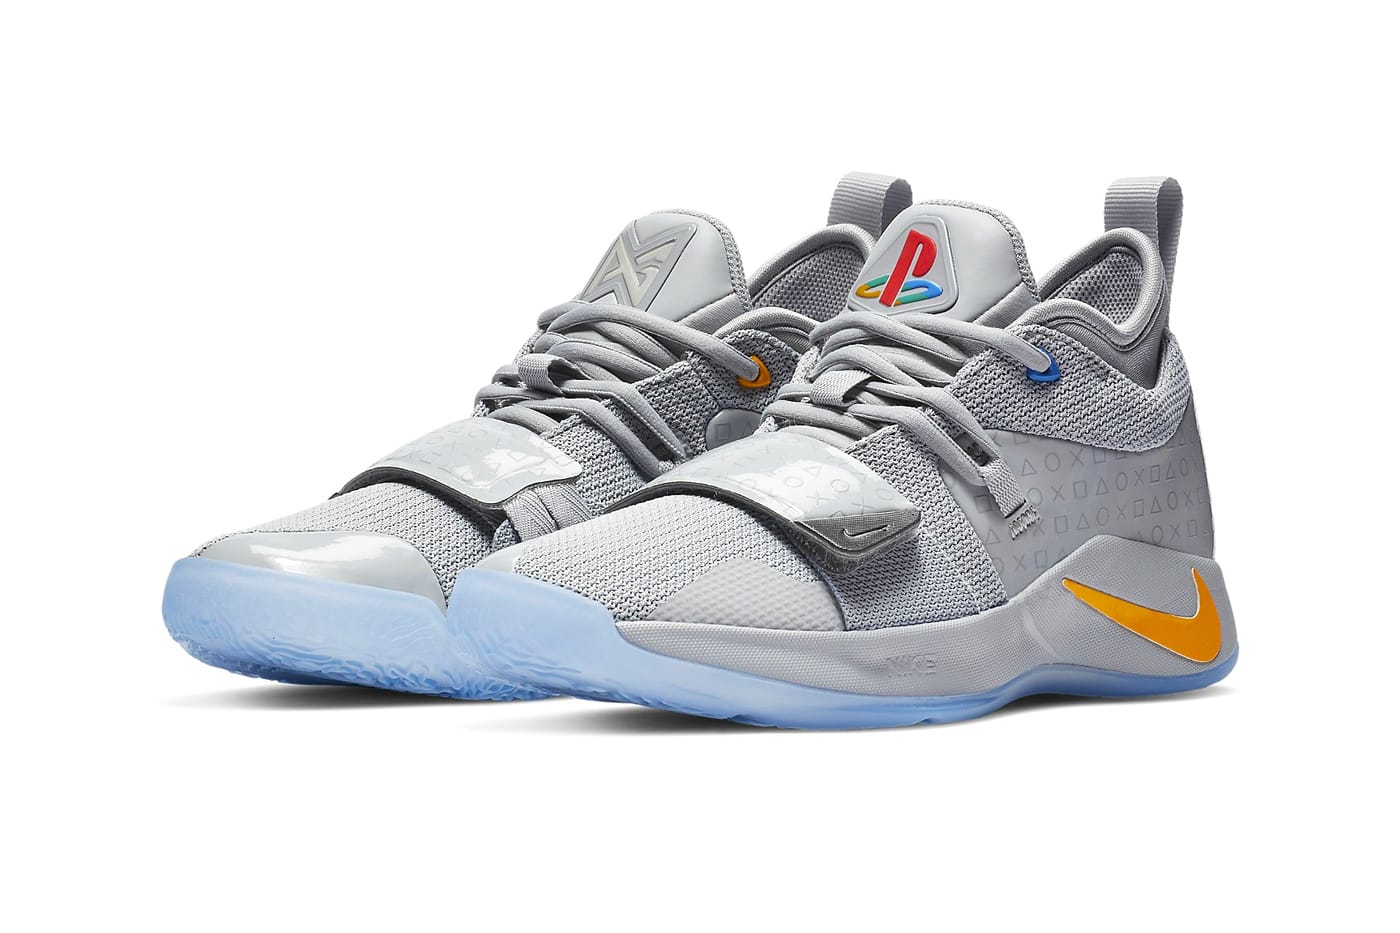 paul george ps1 Kevin Durant shoes on sale